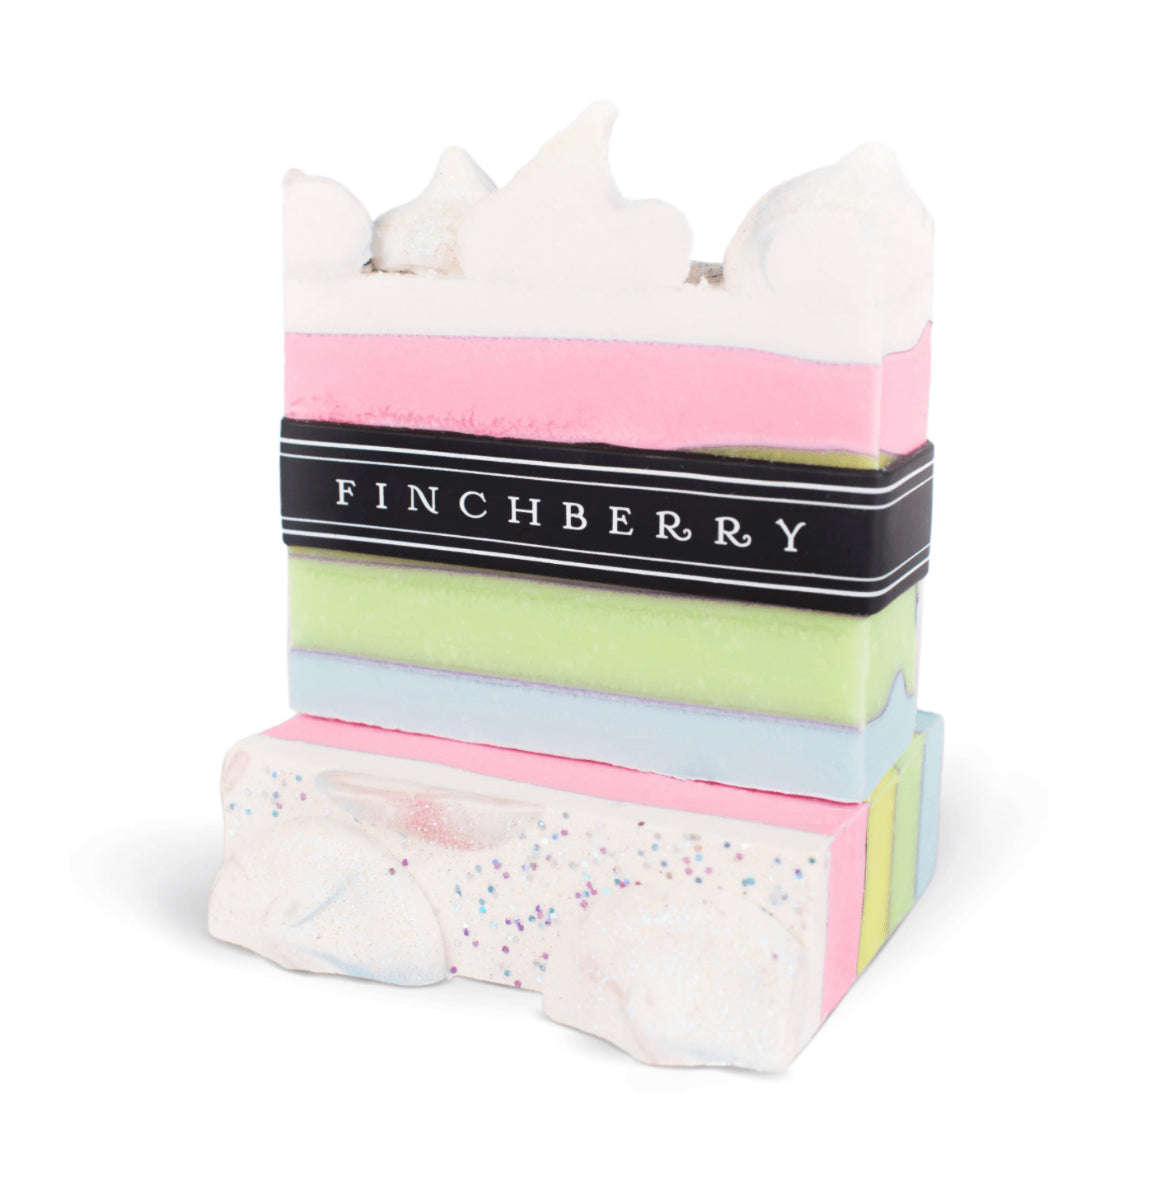 Finchberry | Darling Soap